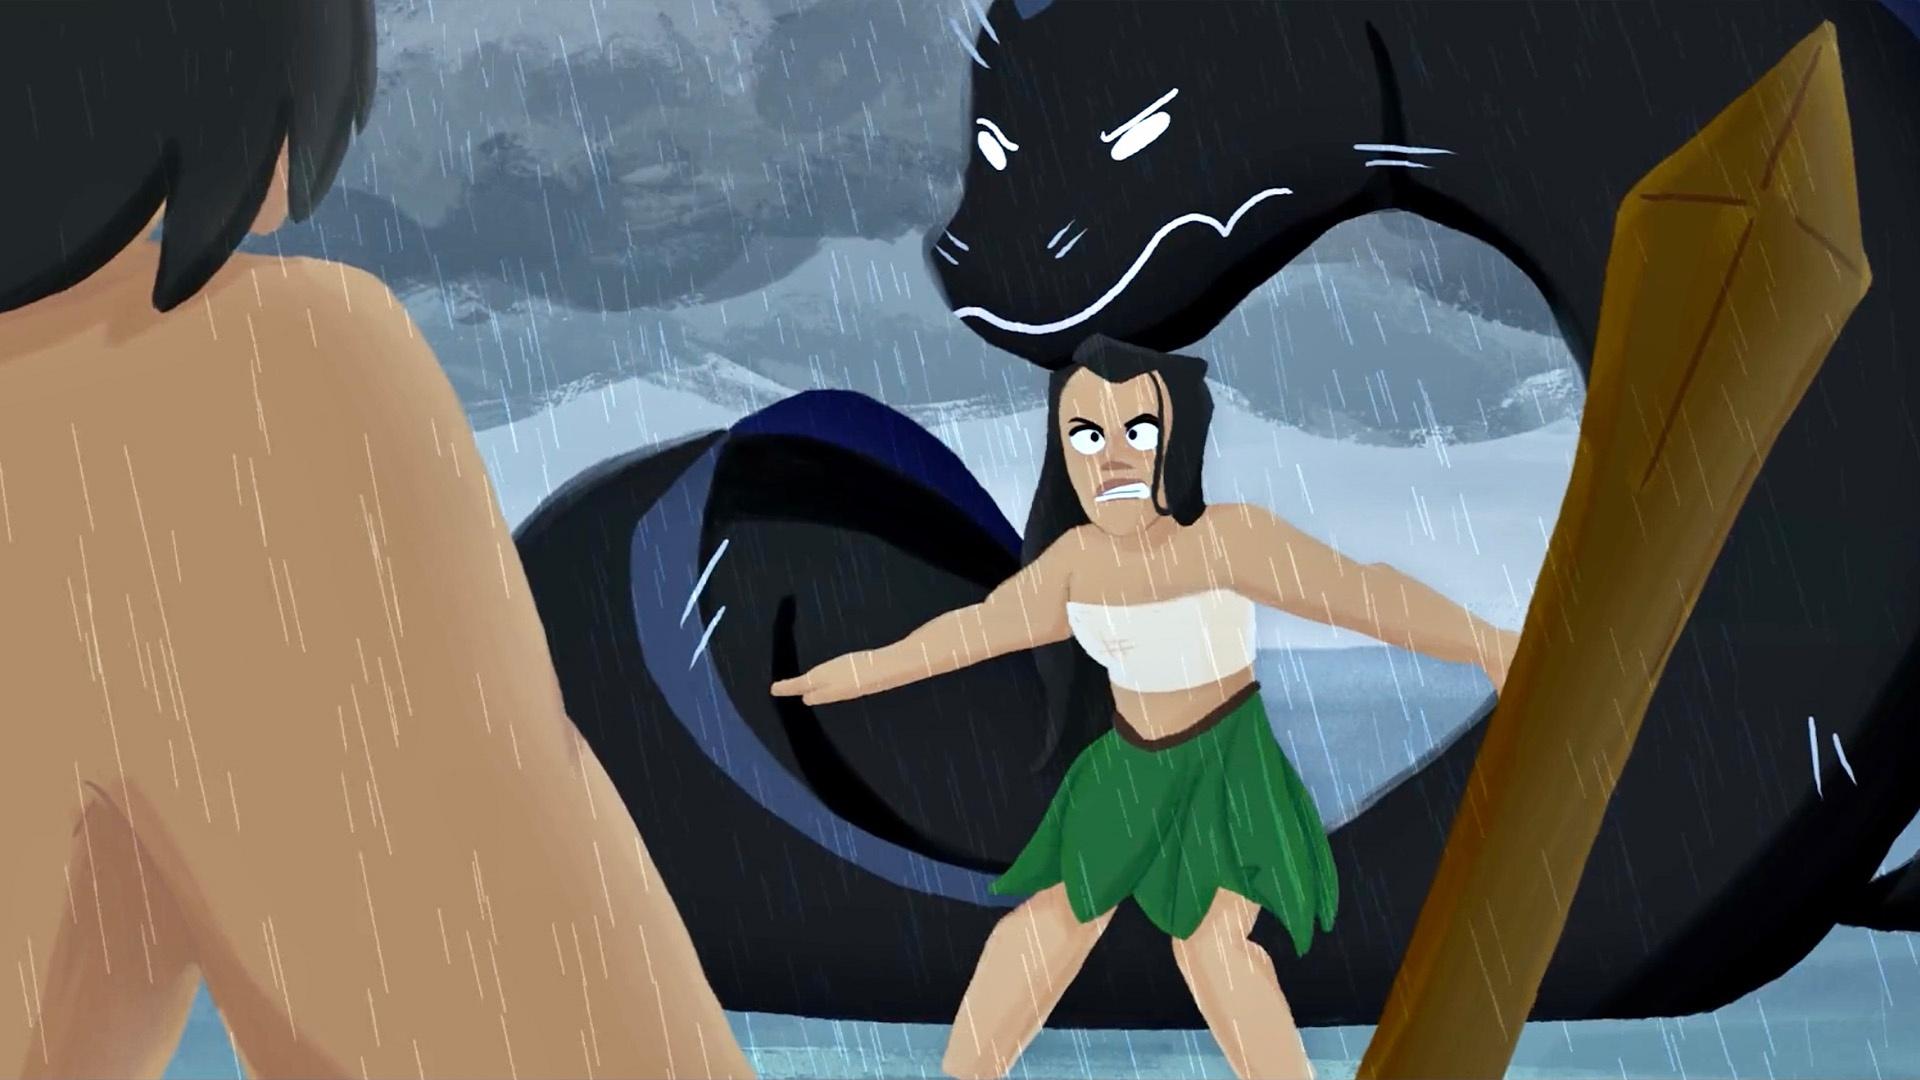 Animated still from the short film, "Sina ma Tinirau" about a prince cursed to be an eel